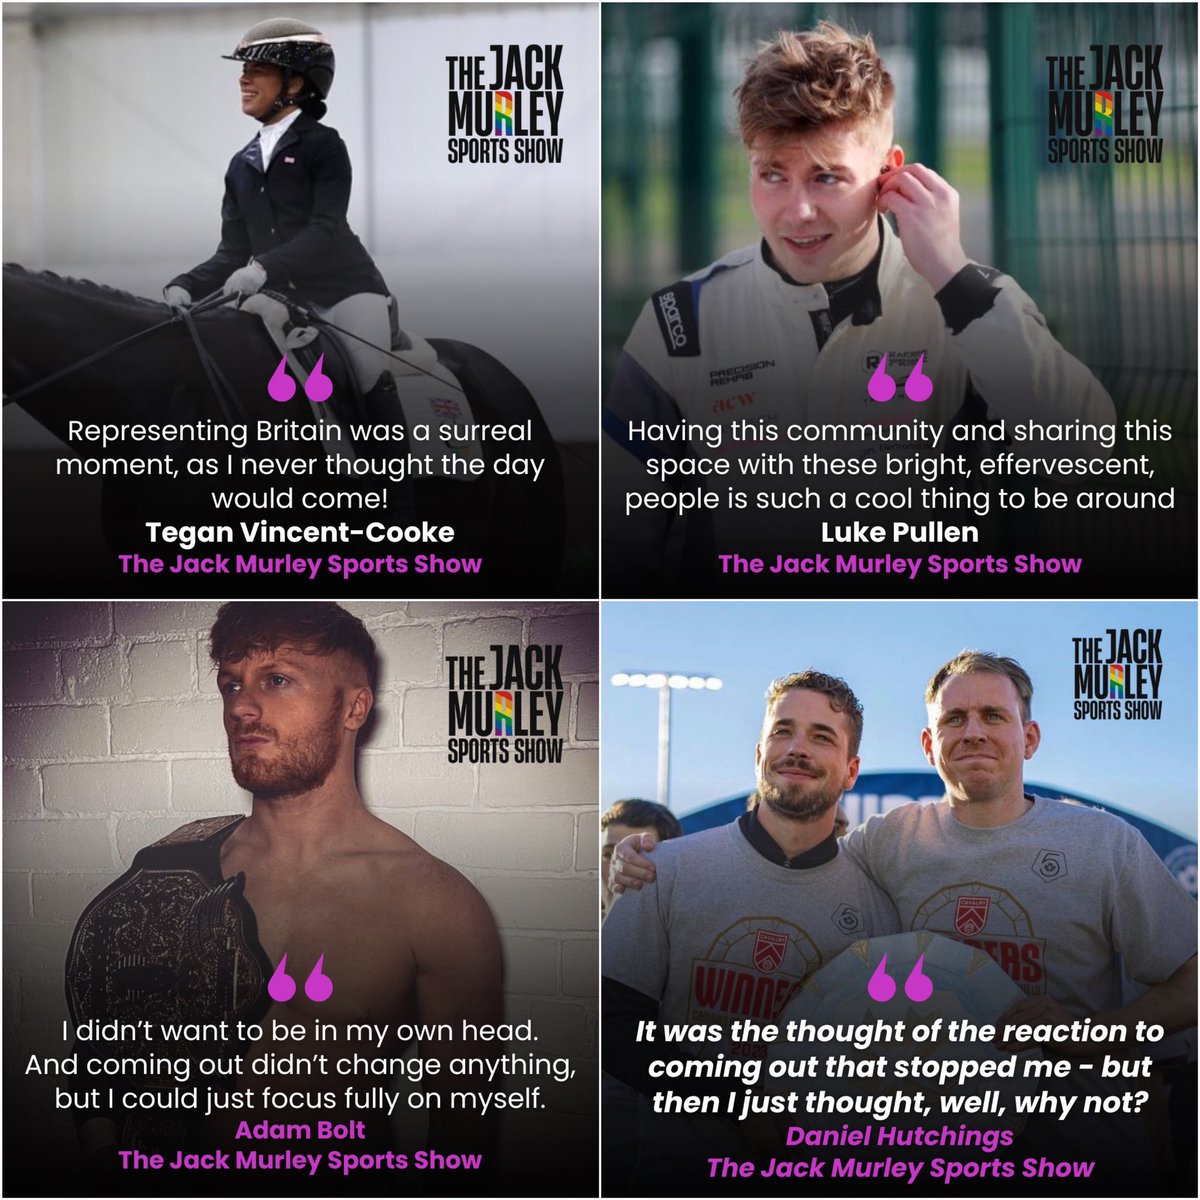 If you’re #LGBTQ and want amazing sporting stories each week, we’re still the show for you. From football to racing to dressage to wrestling, top stars from around the world share their sporting and personal journeys. We’d love you to check us out 🏳️‍🌈 👉🏻 podfollow.com/1740961597